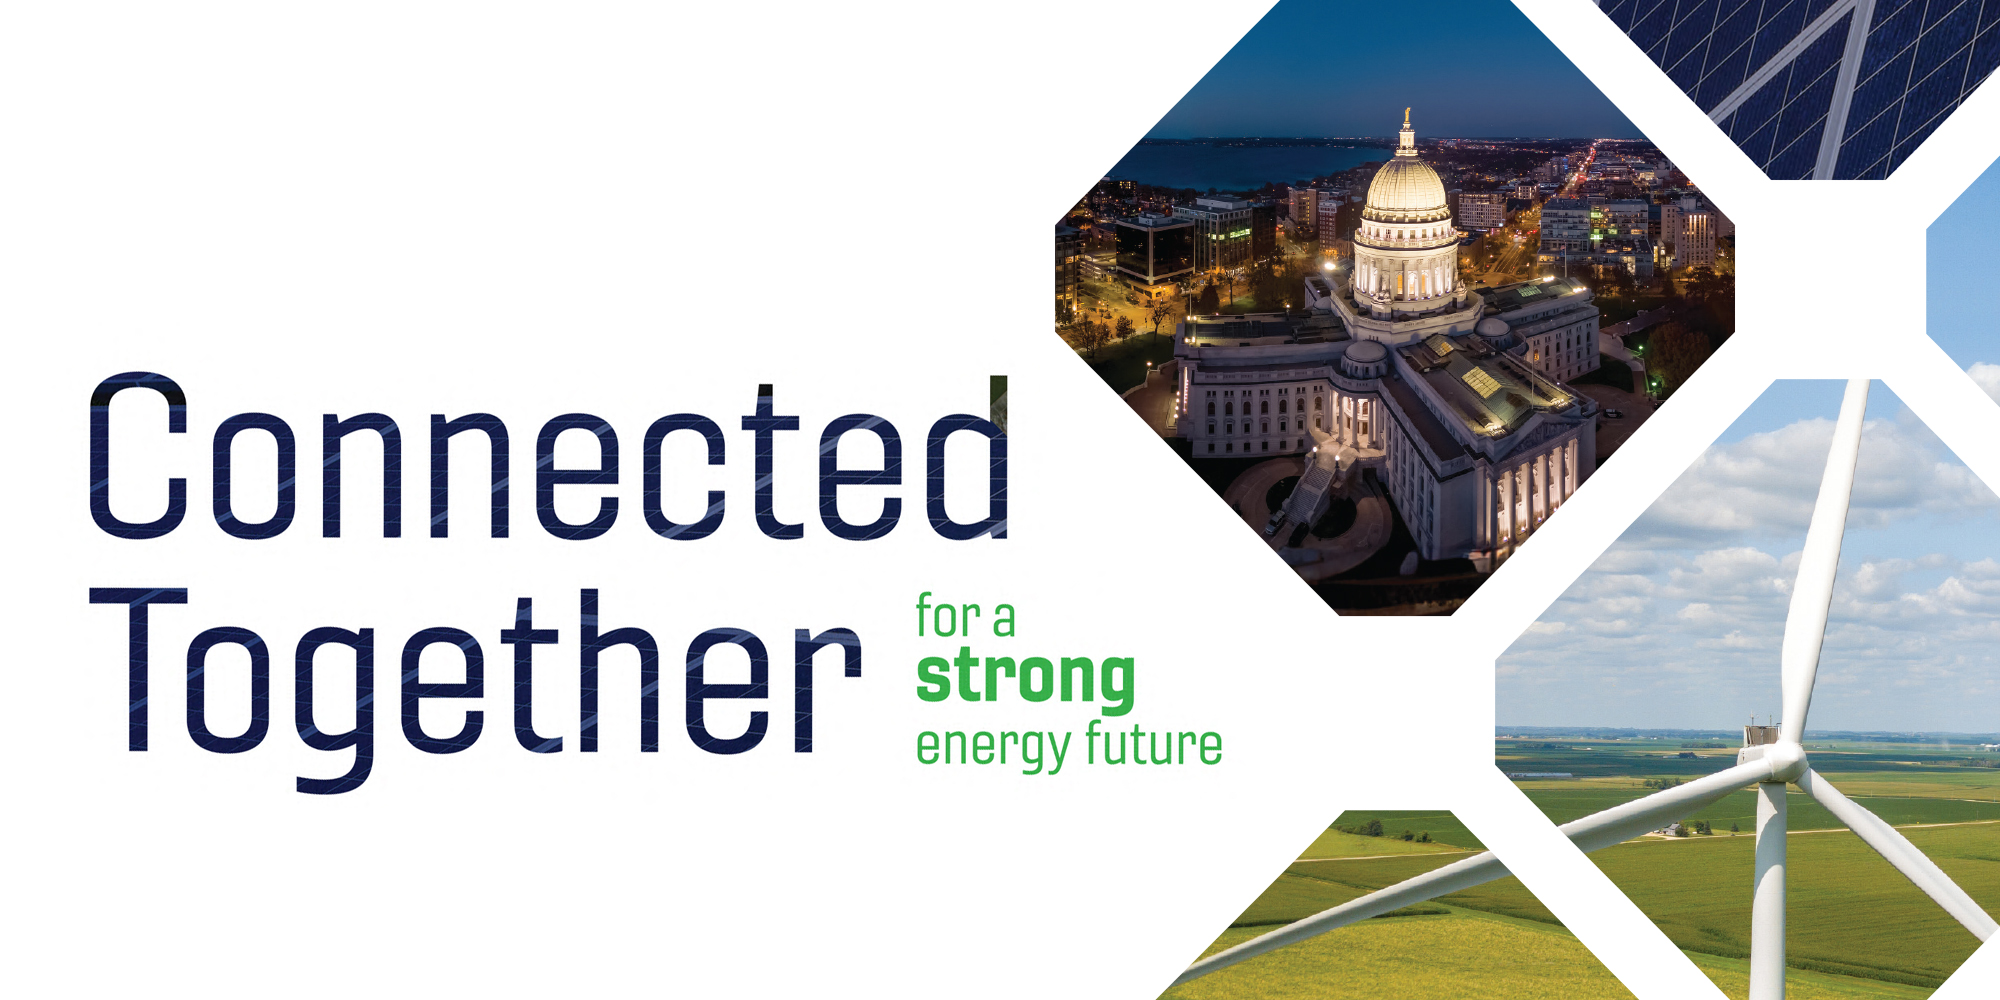 Connected Together for a strong energy future